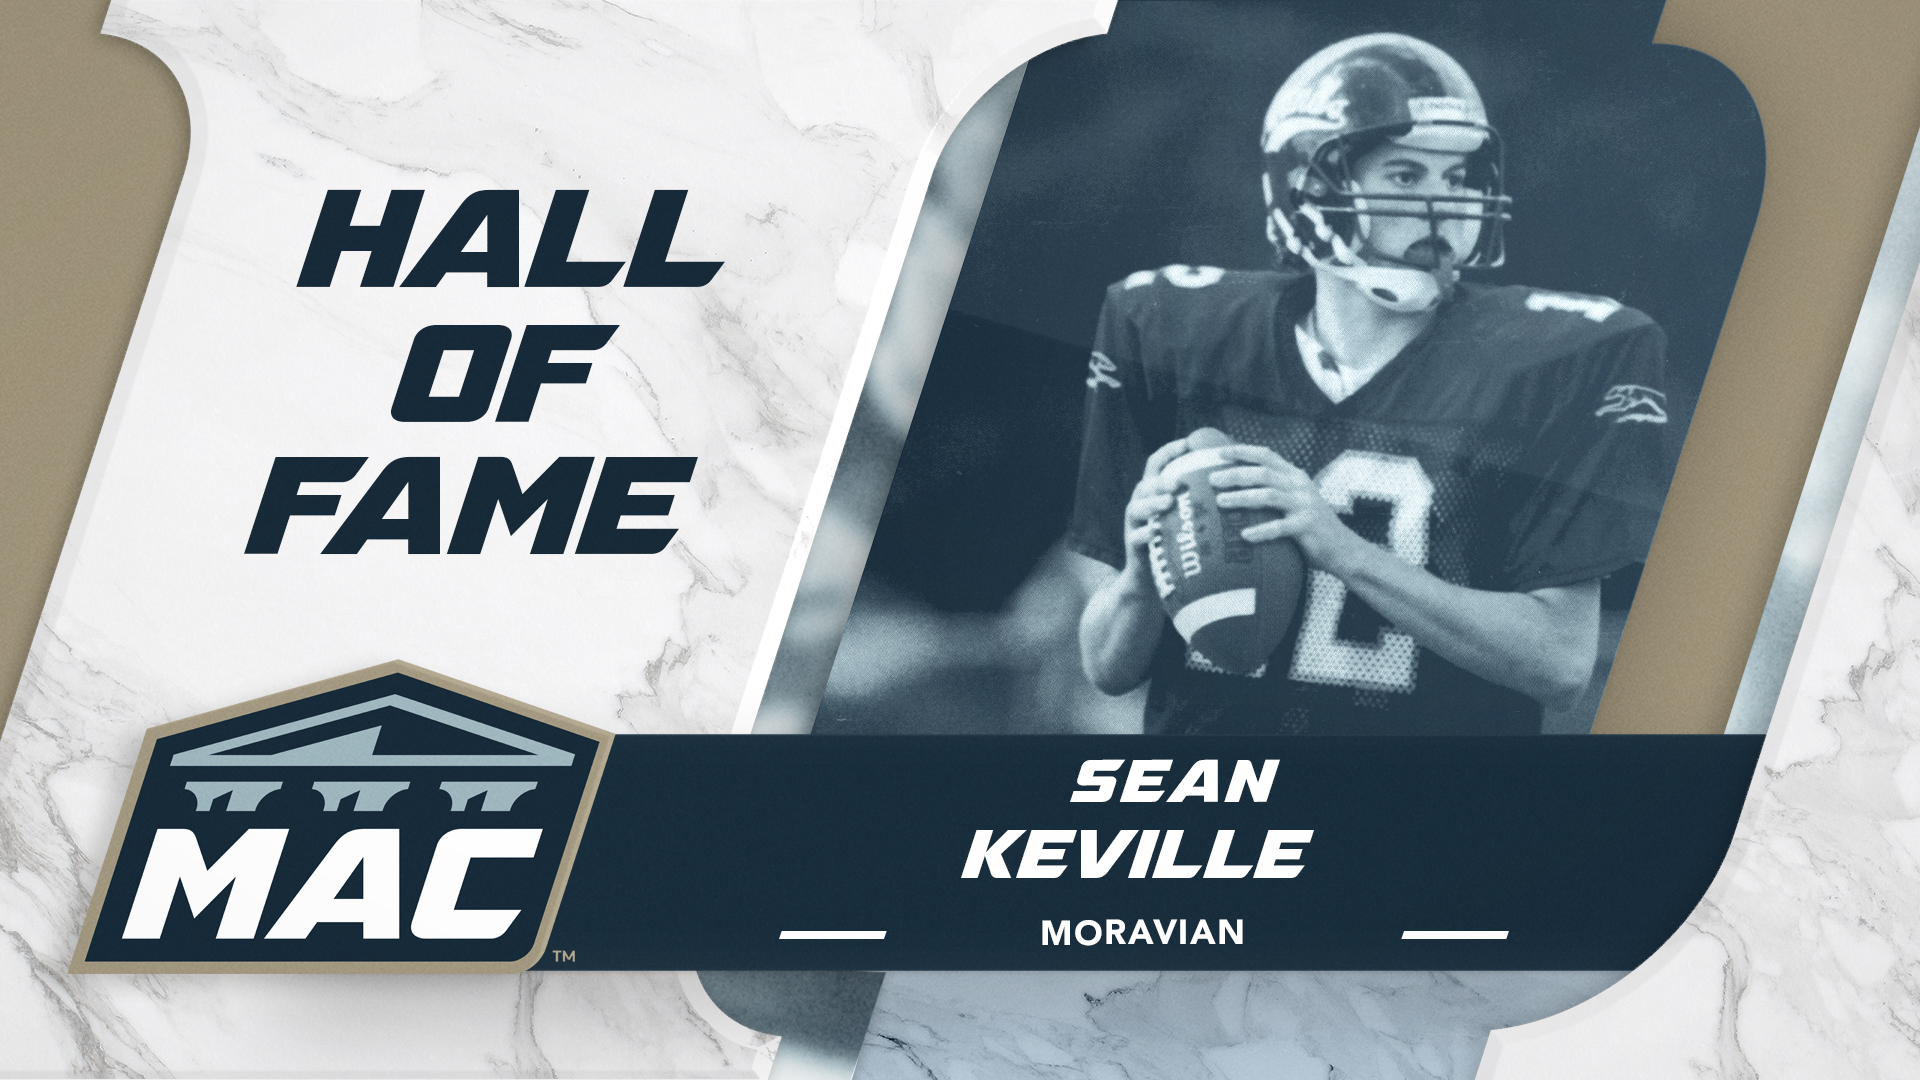 Sean Keville, Class of 1996, selected to the MAC Hall of Fame.